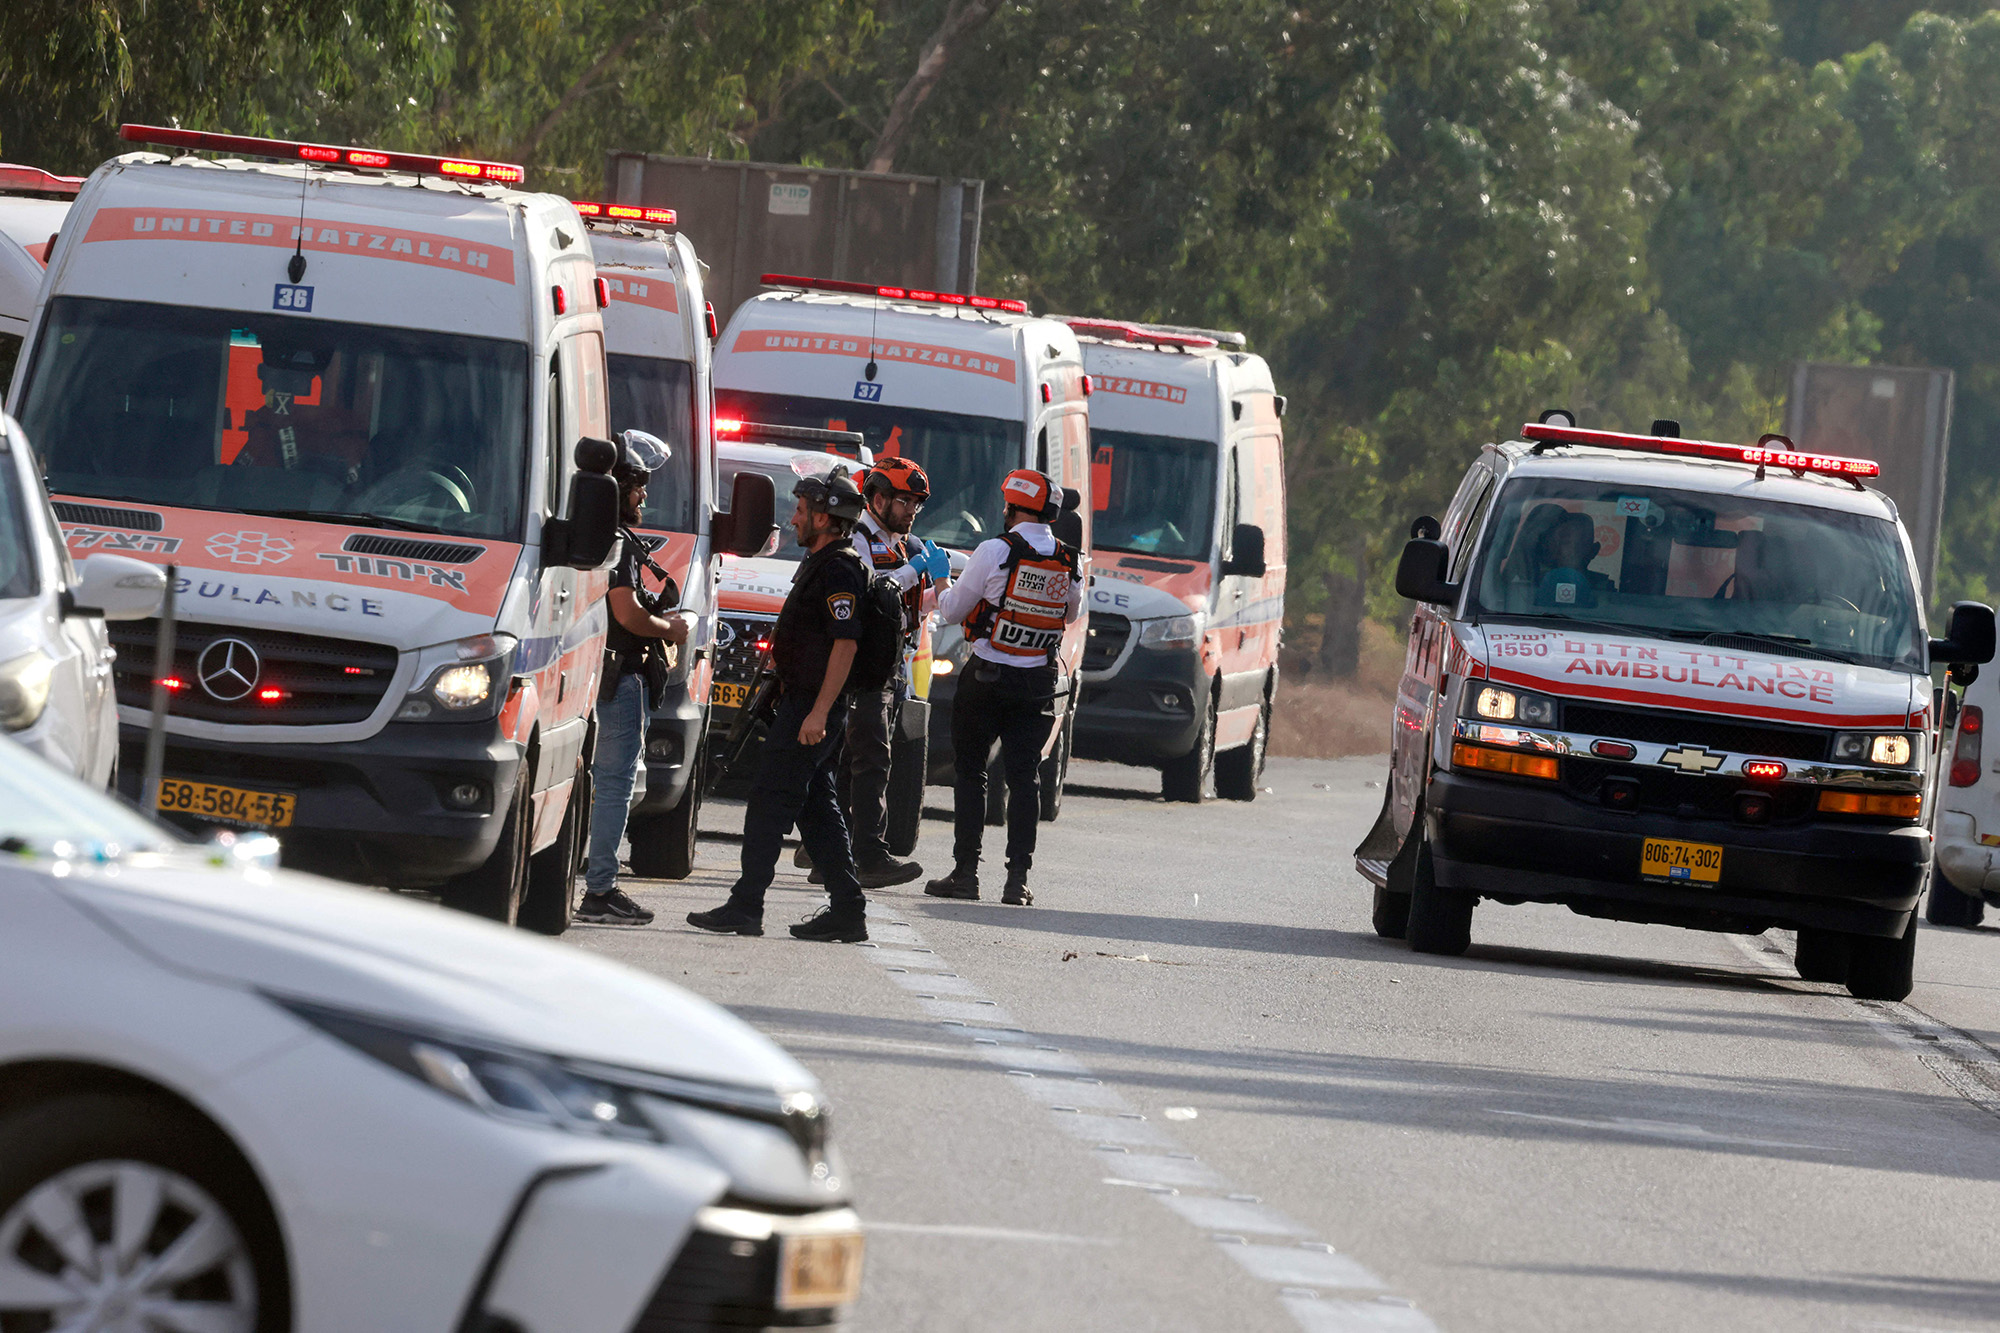 Israeli rescue teams wait next to ambulances parked just outside the southern city of Sderot, Israel, to evacuate the wounded on October 7.